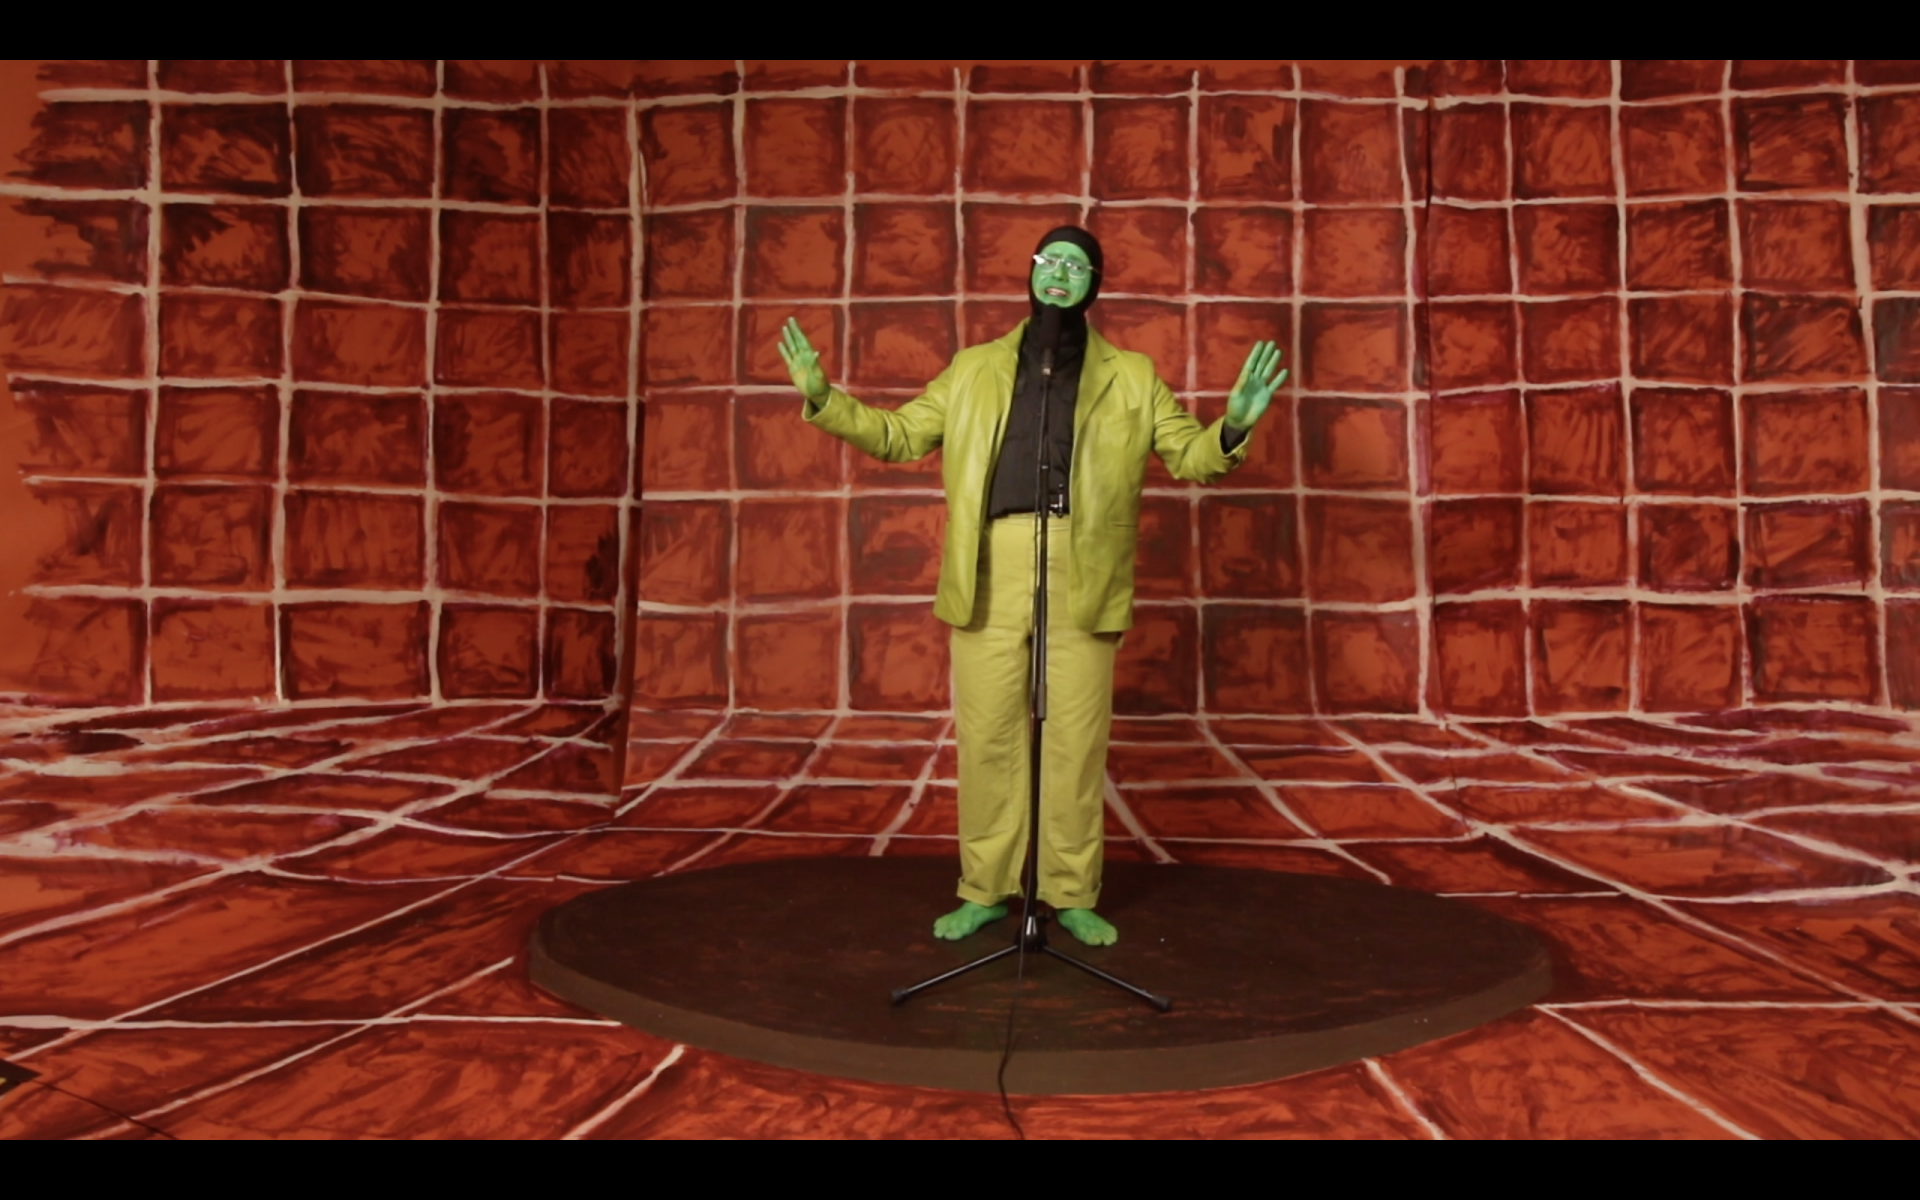 A man in a green suit stands facing a microphone in a painted red tiled space.